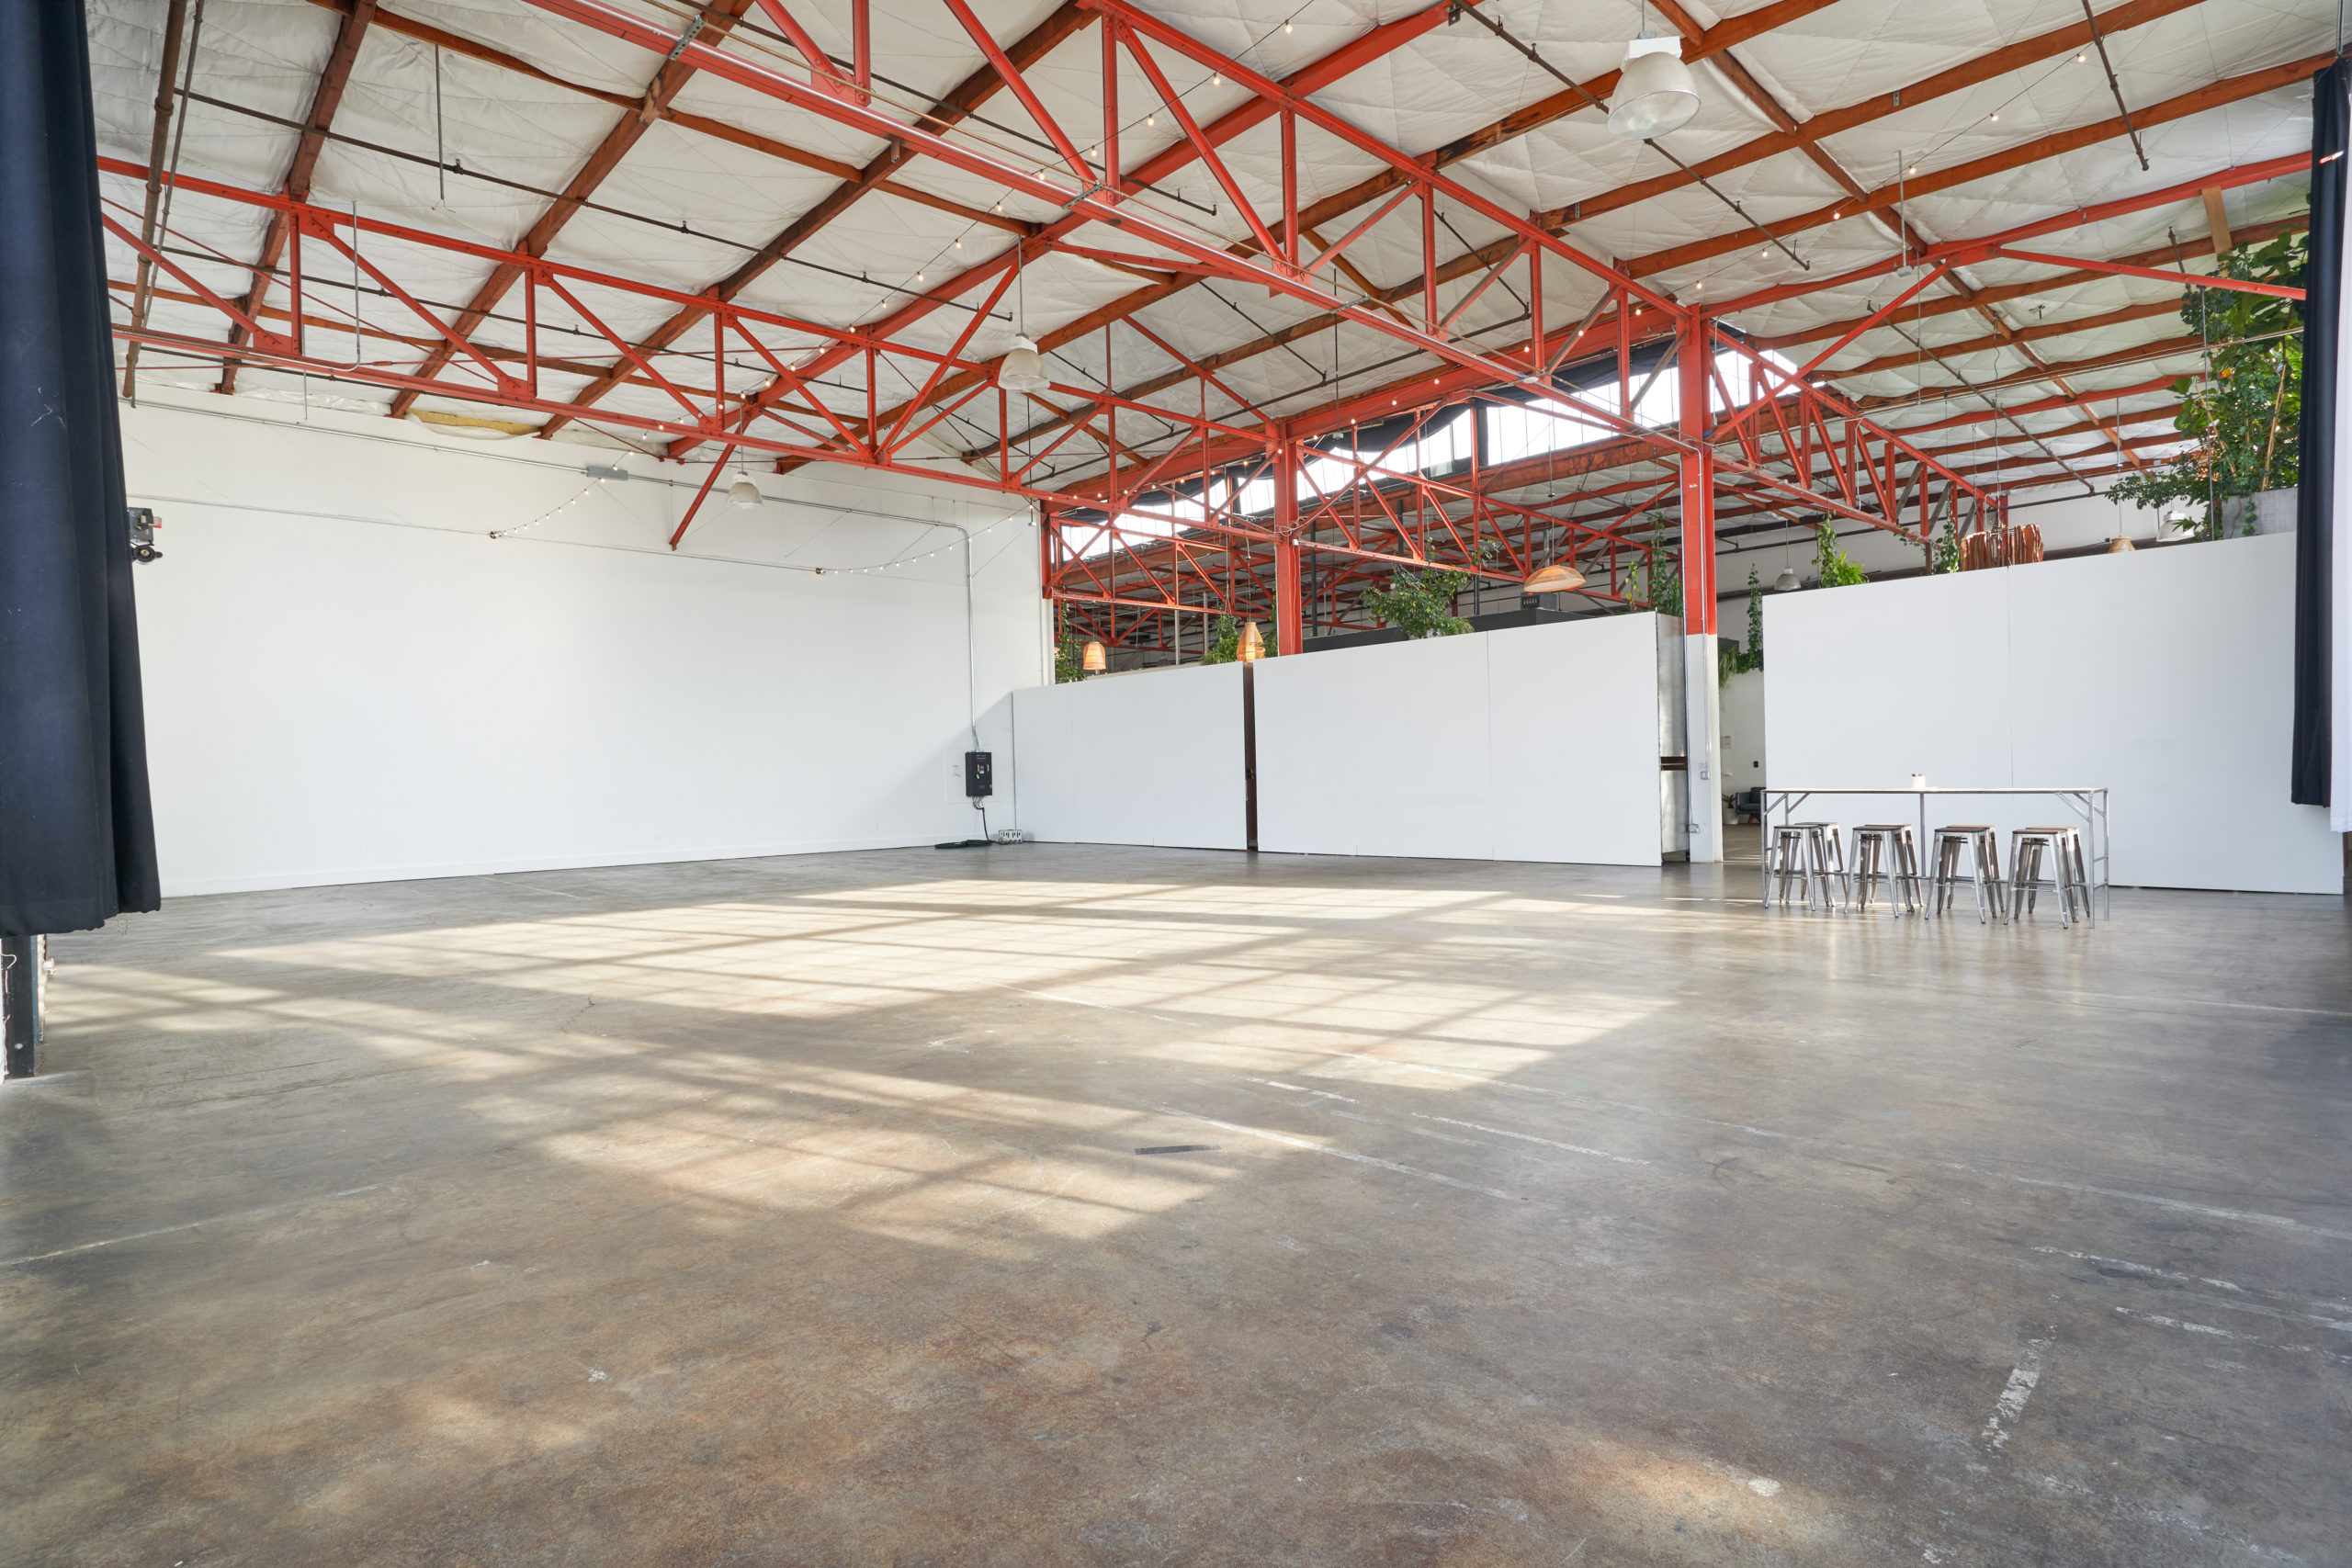 A view of the white walls and the industrial orange beams on the ceiling of Studio 5. There is a small table and chairs on the left of the best multiple set studio rental Berkeley has to offer with 3,700 square feet of space.